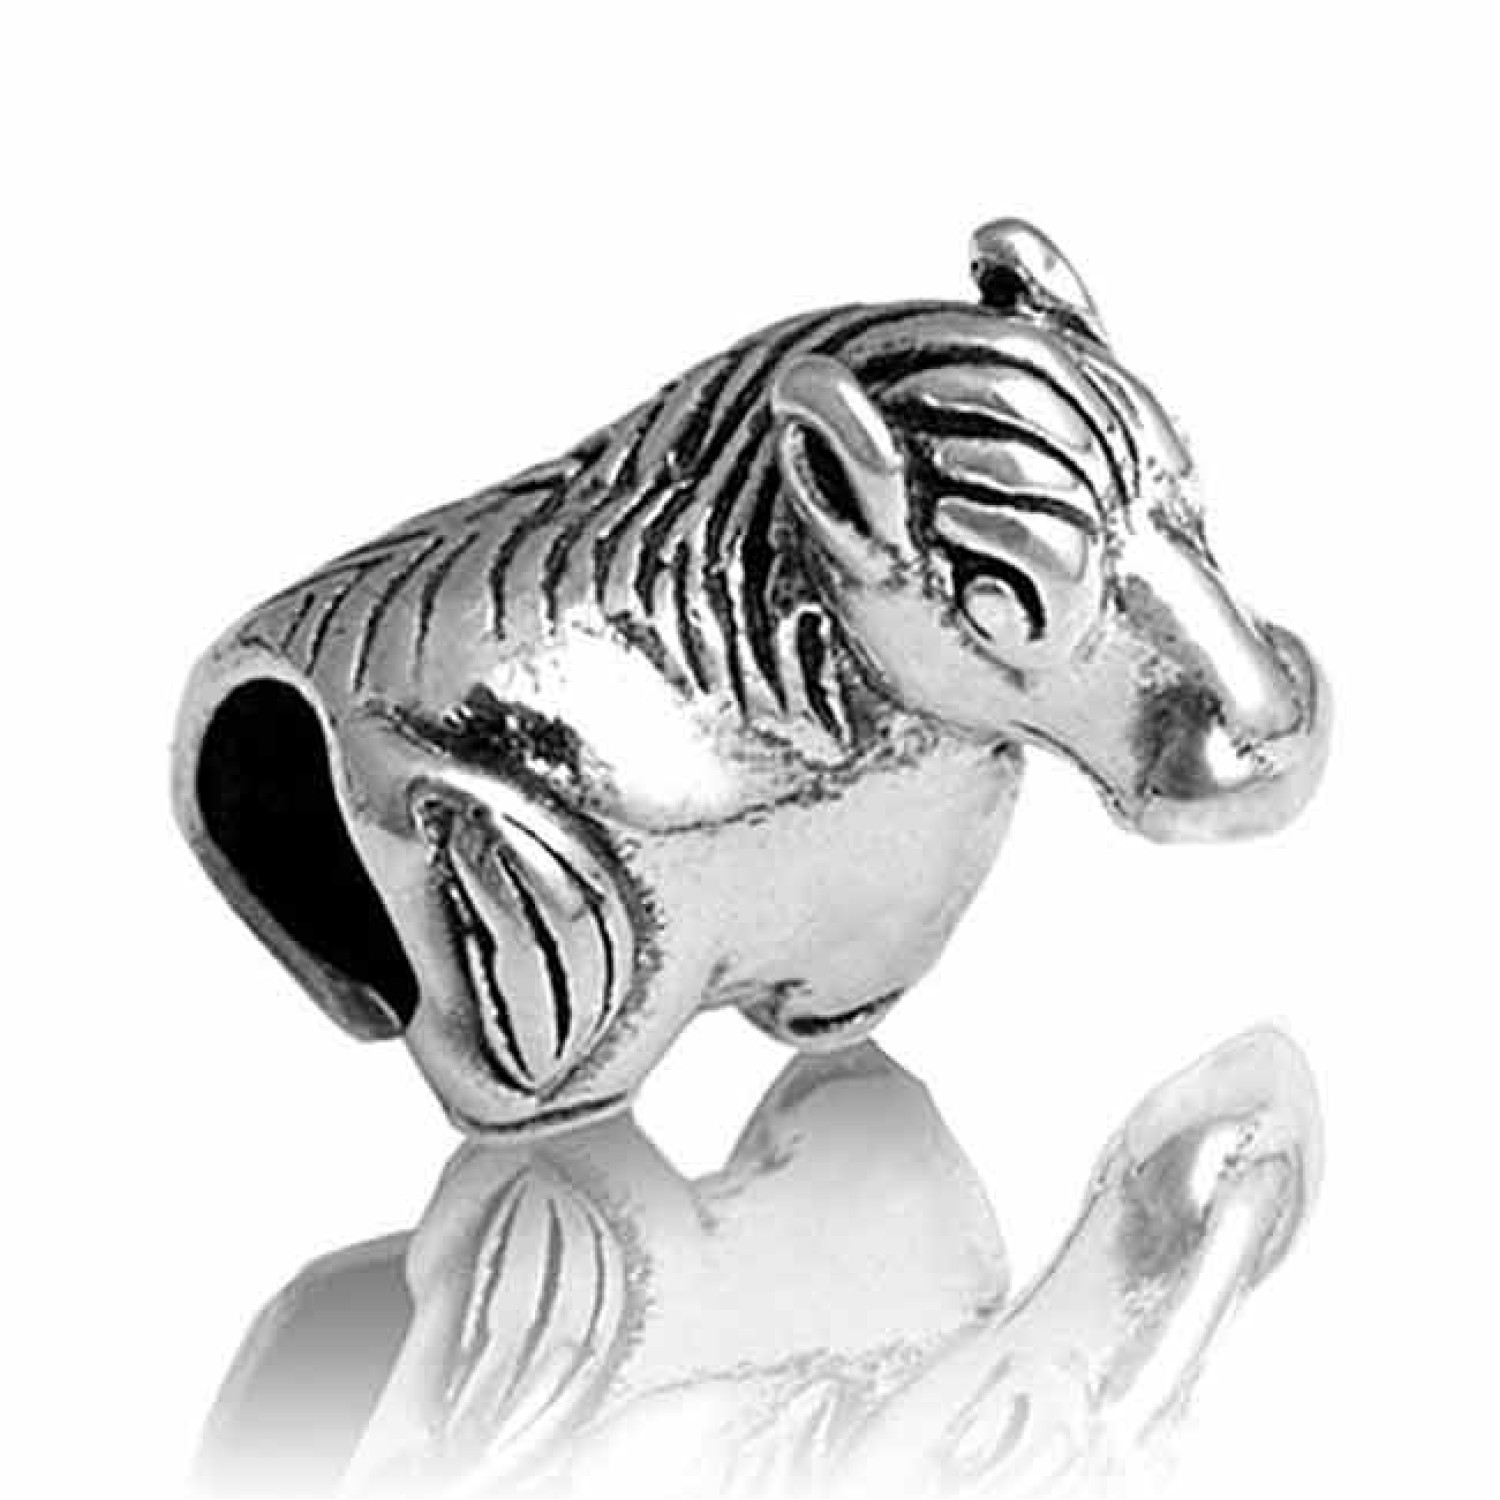 LK062 Evolve Lightning the Pony. By wearing Evolve New Zealand jewellery you celebrate Aotearoa and the most important events in your life in a very visual way, safeguarding your ever evolving memories for a lifetime Sterling Silver Christies exclusive @c